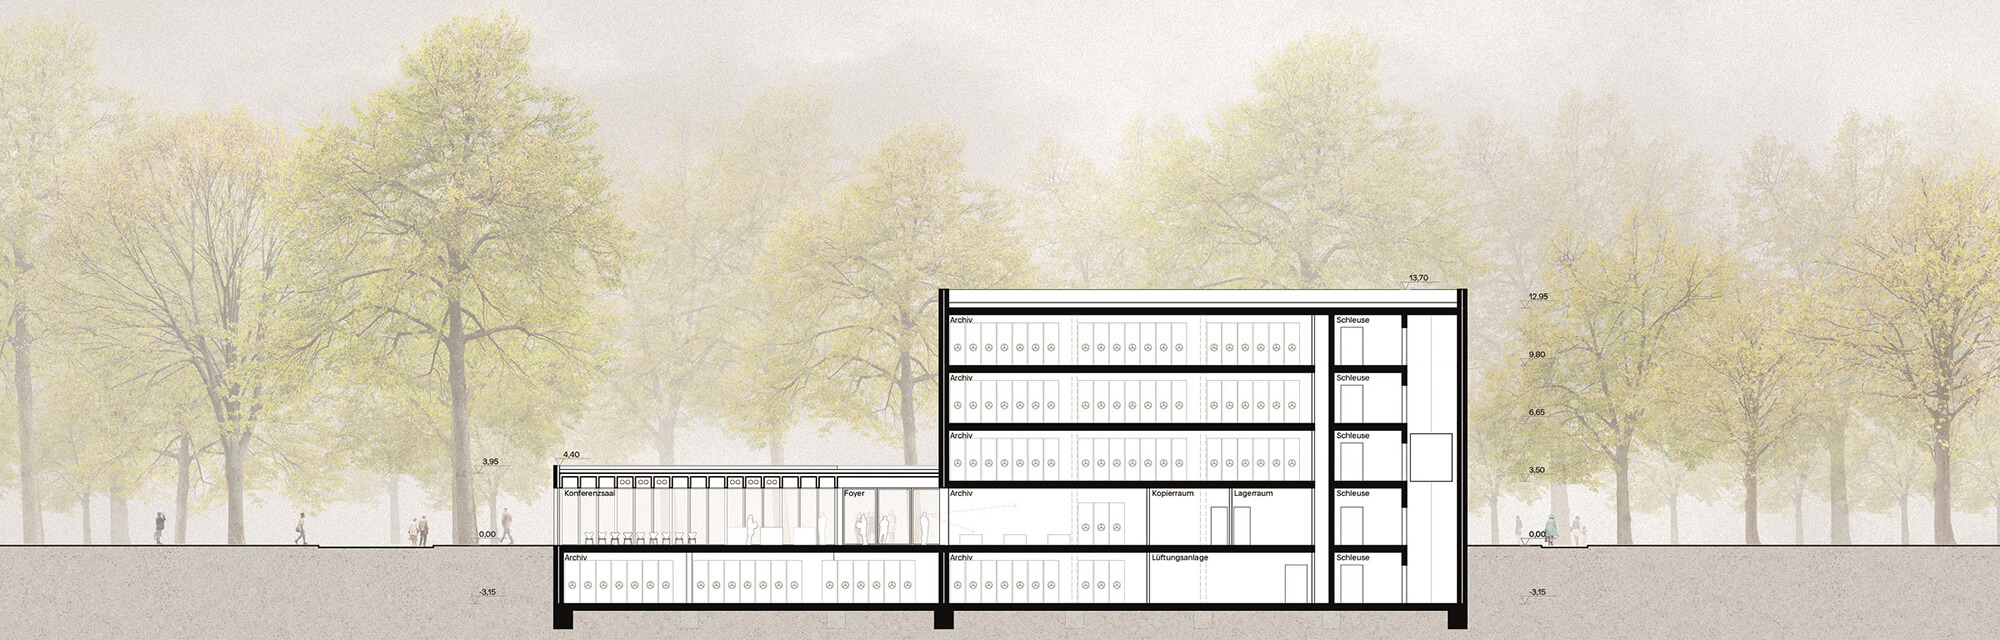 RIEHLE KOETH to design new home for the Arolsen Archives